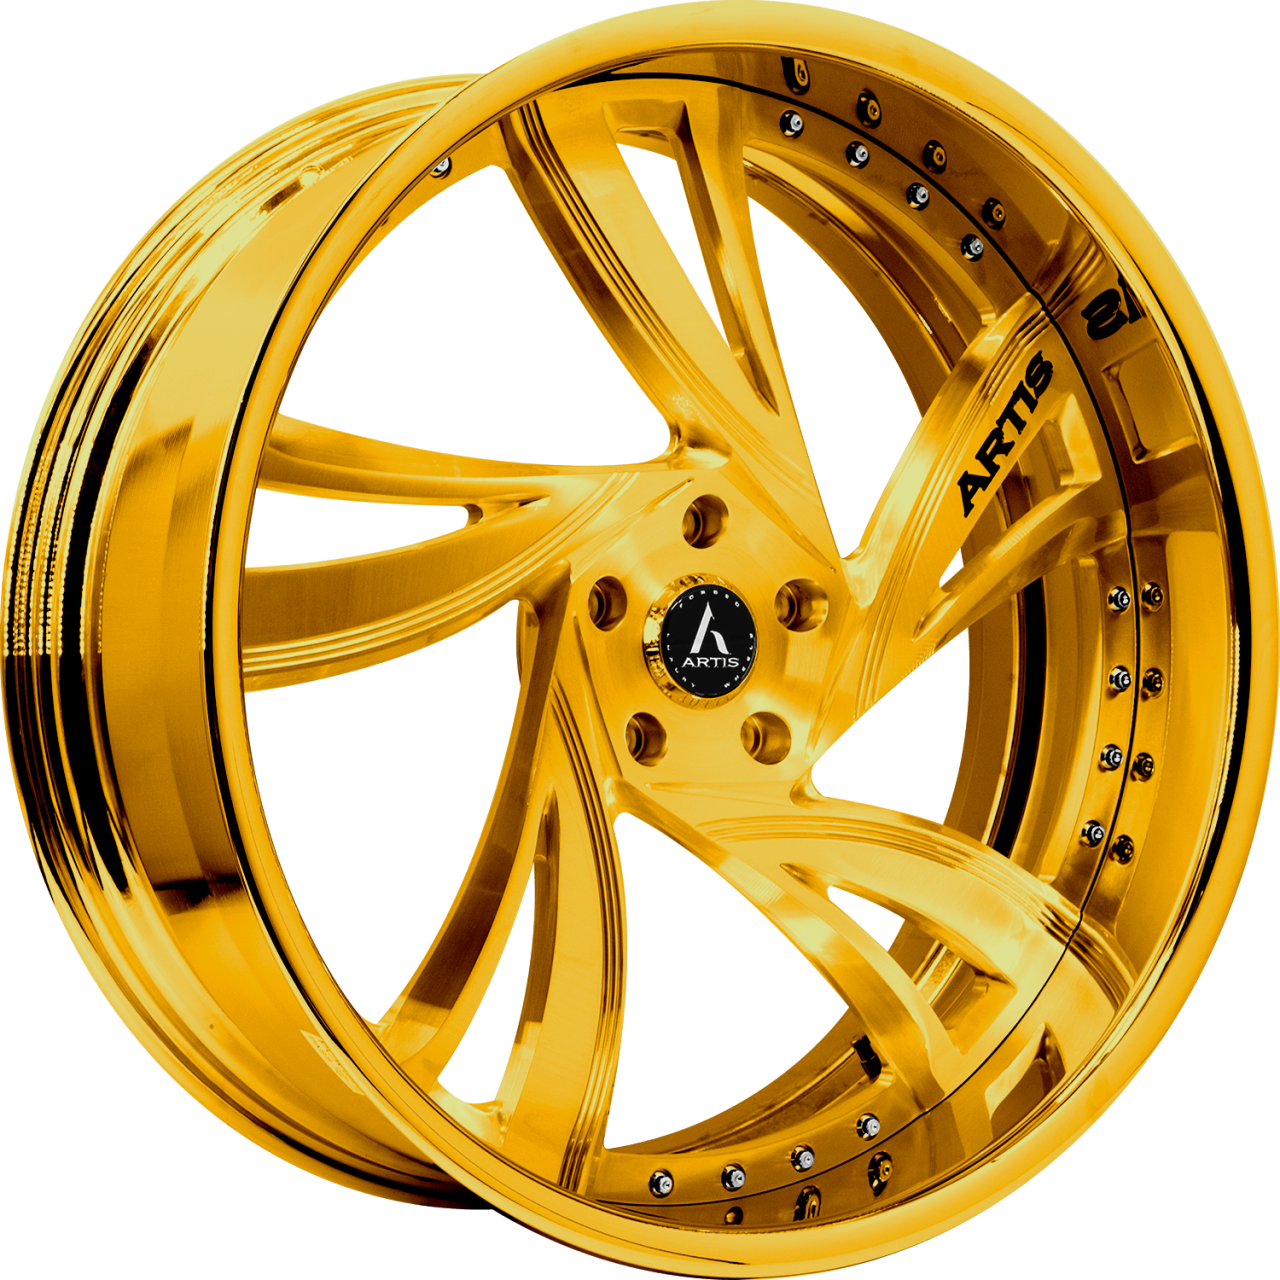 Artis Forged Kingston-M wheel with Gold finish